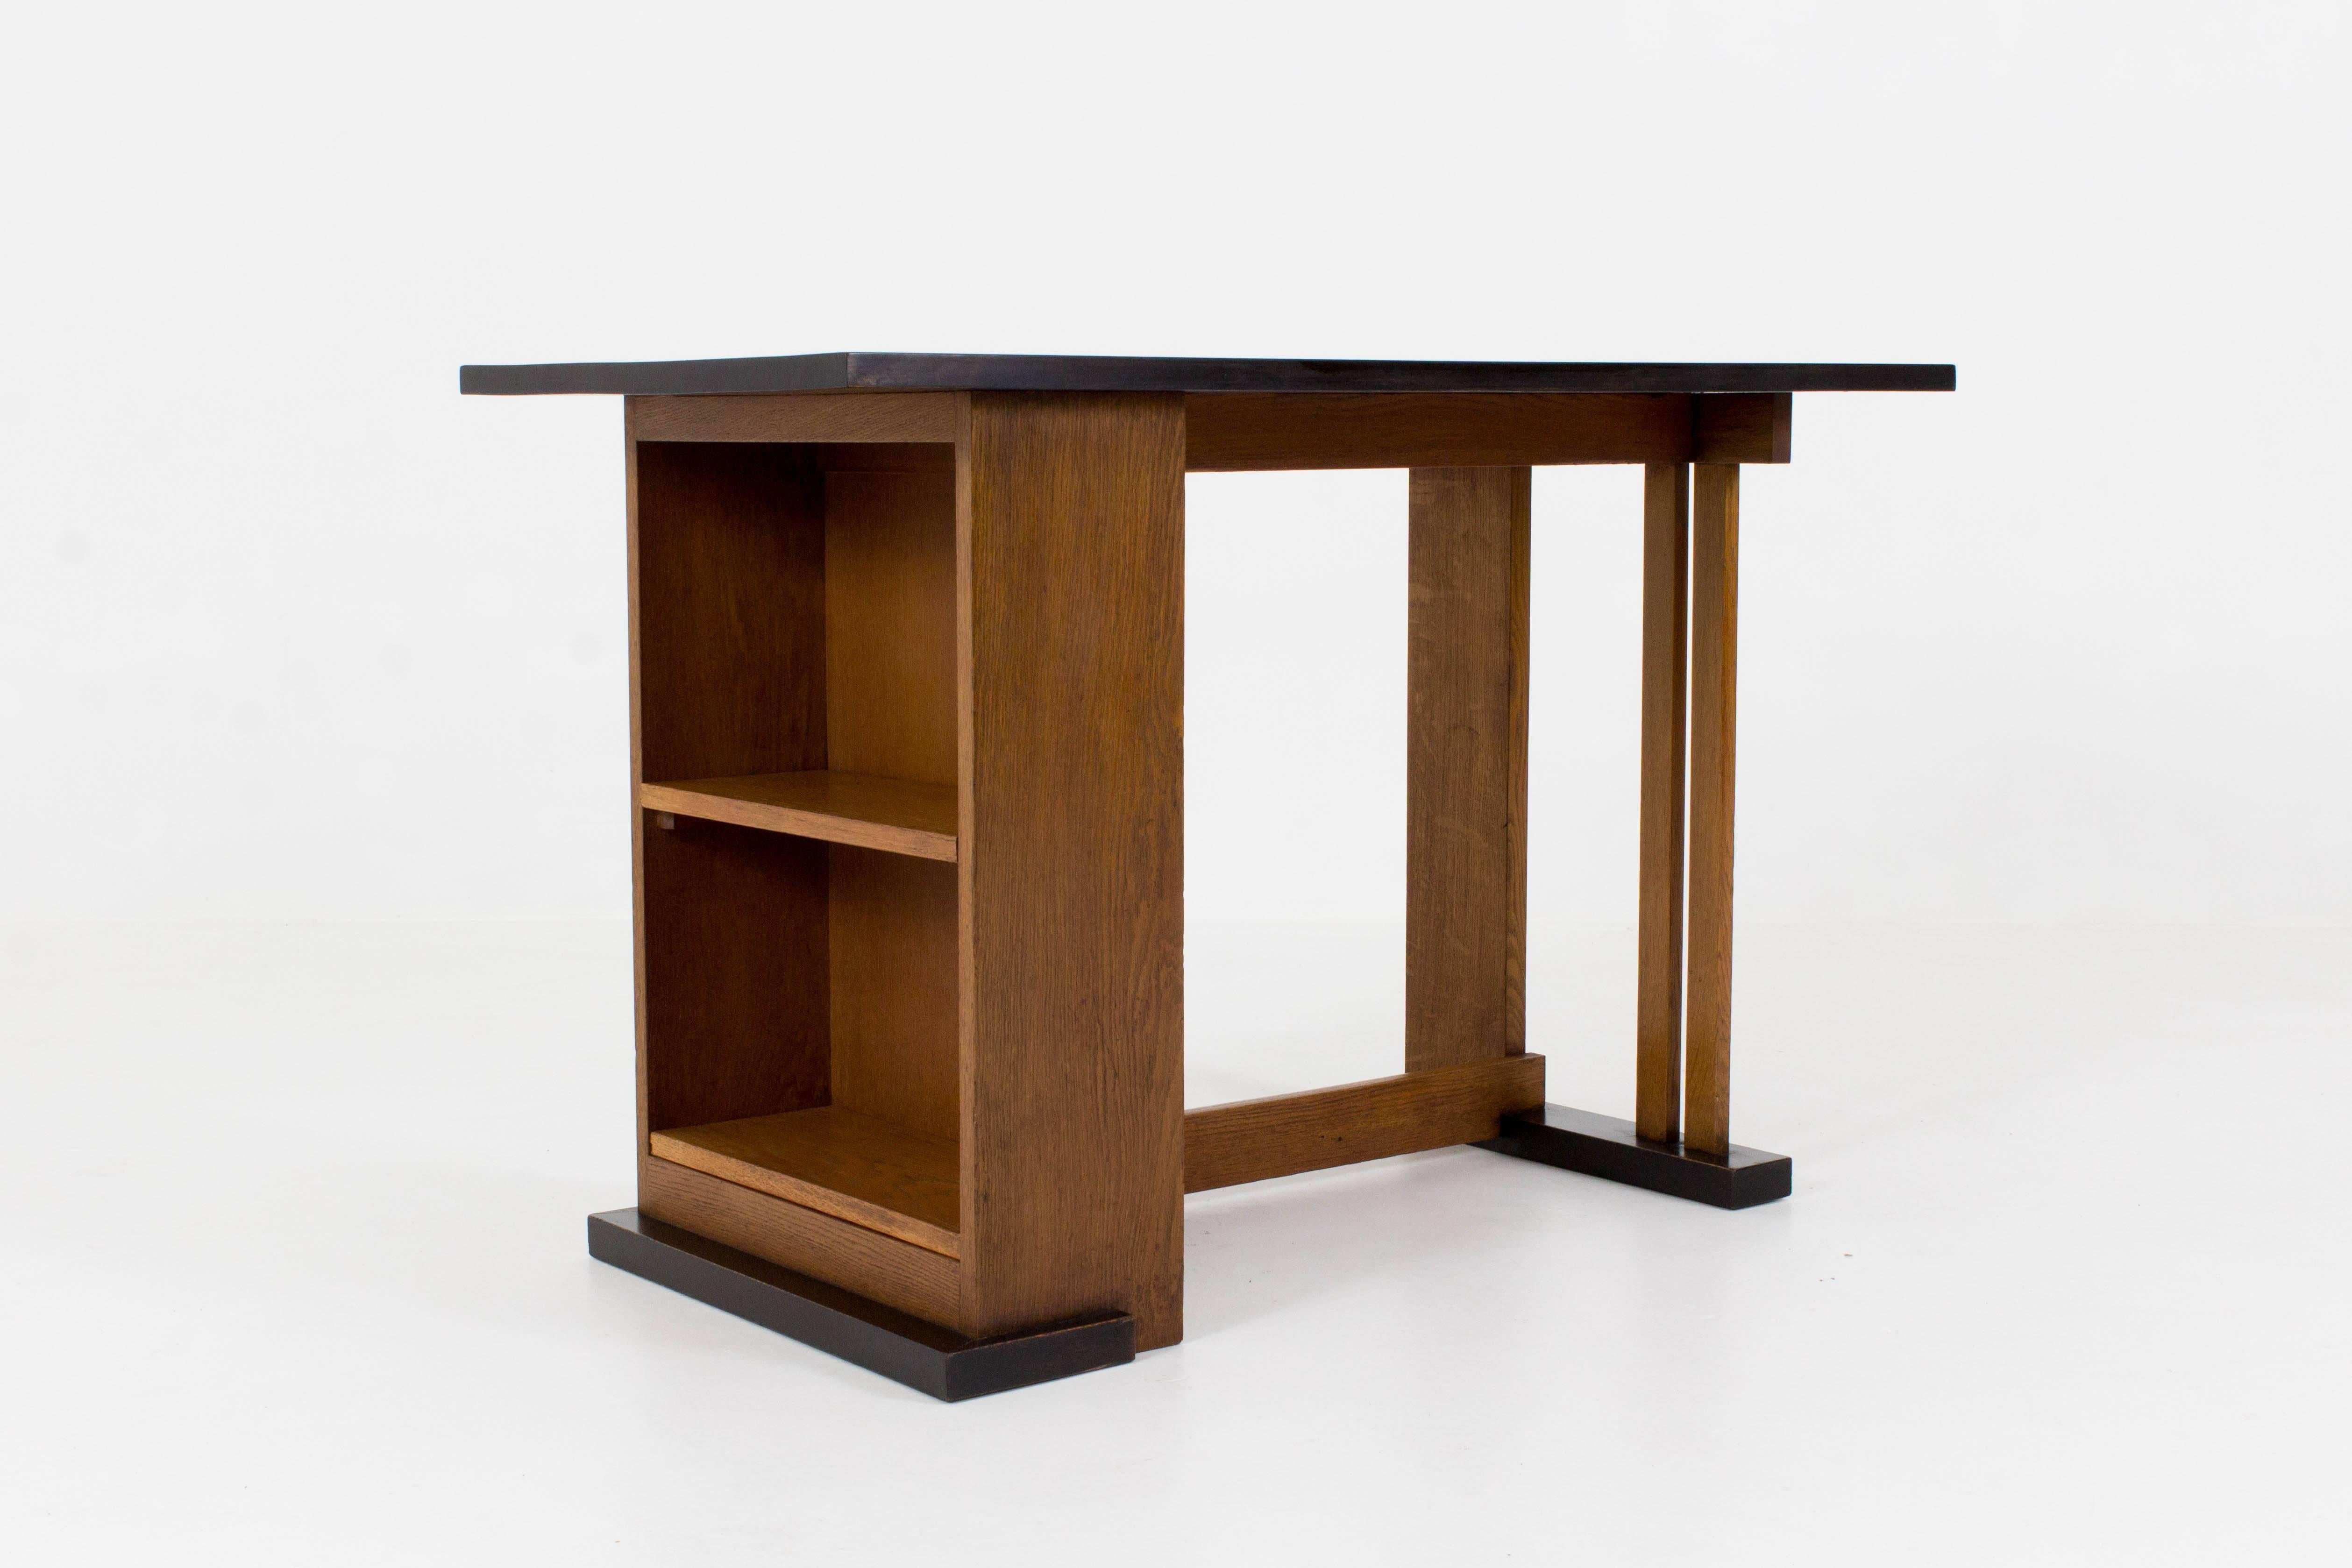 Important and rare Art Deco Haagse School desk by Cor Alons for L.O.V.
Striking Dutch design.
Solid oak with original black lacquered beech top.
Marked with original L.O.V. tag.
In very good condition with minor wear consistent with age and